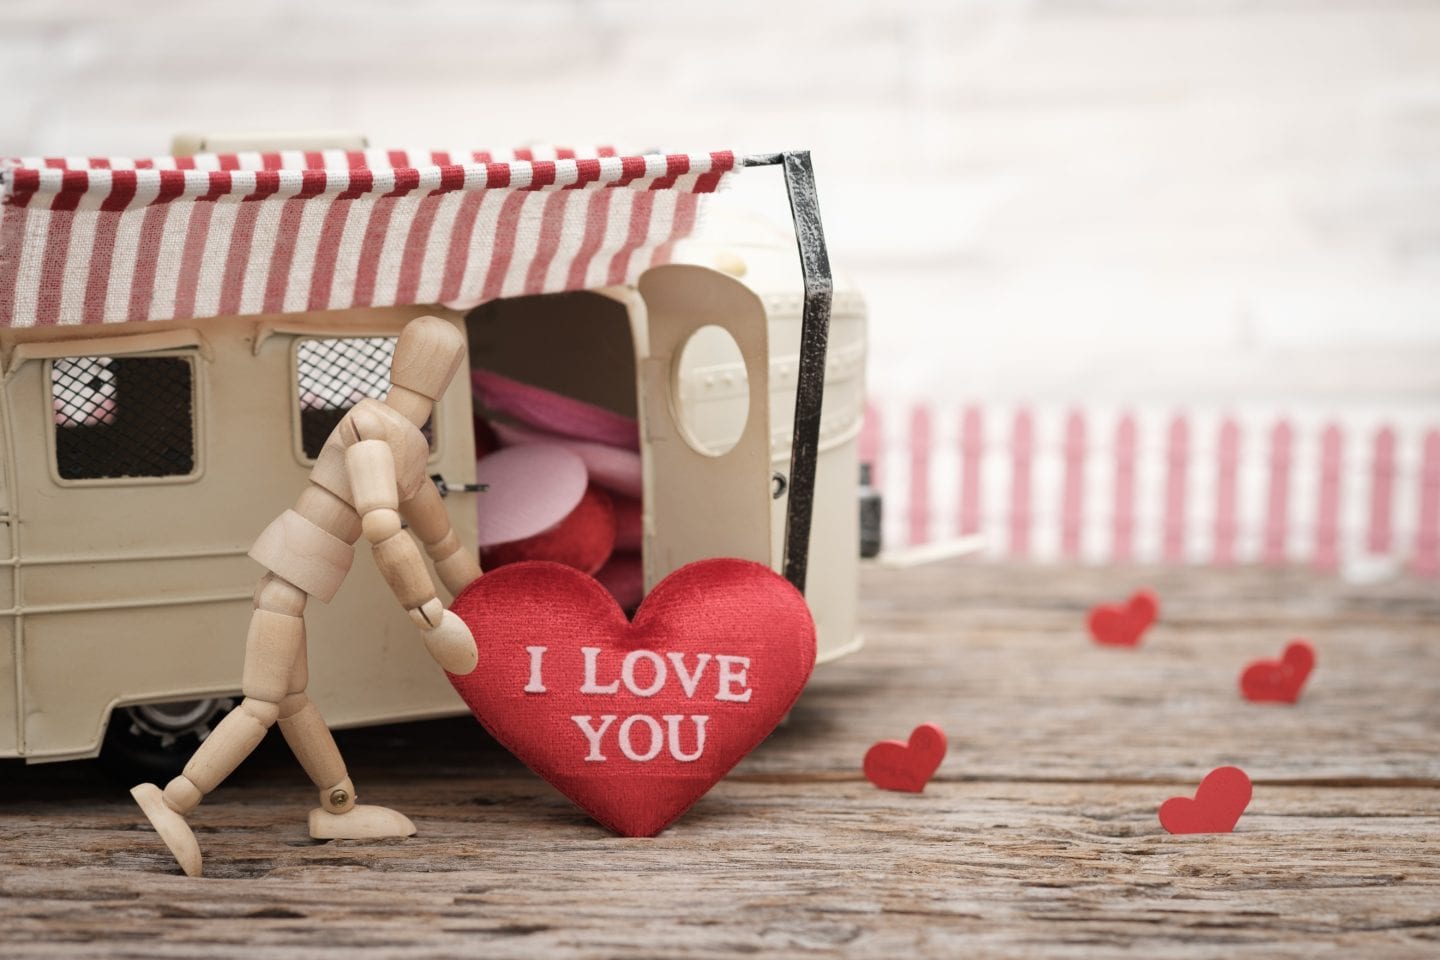 Crafts // 6 Great Valentines Day Craft Ideas for the Home